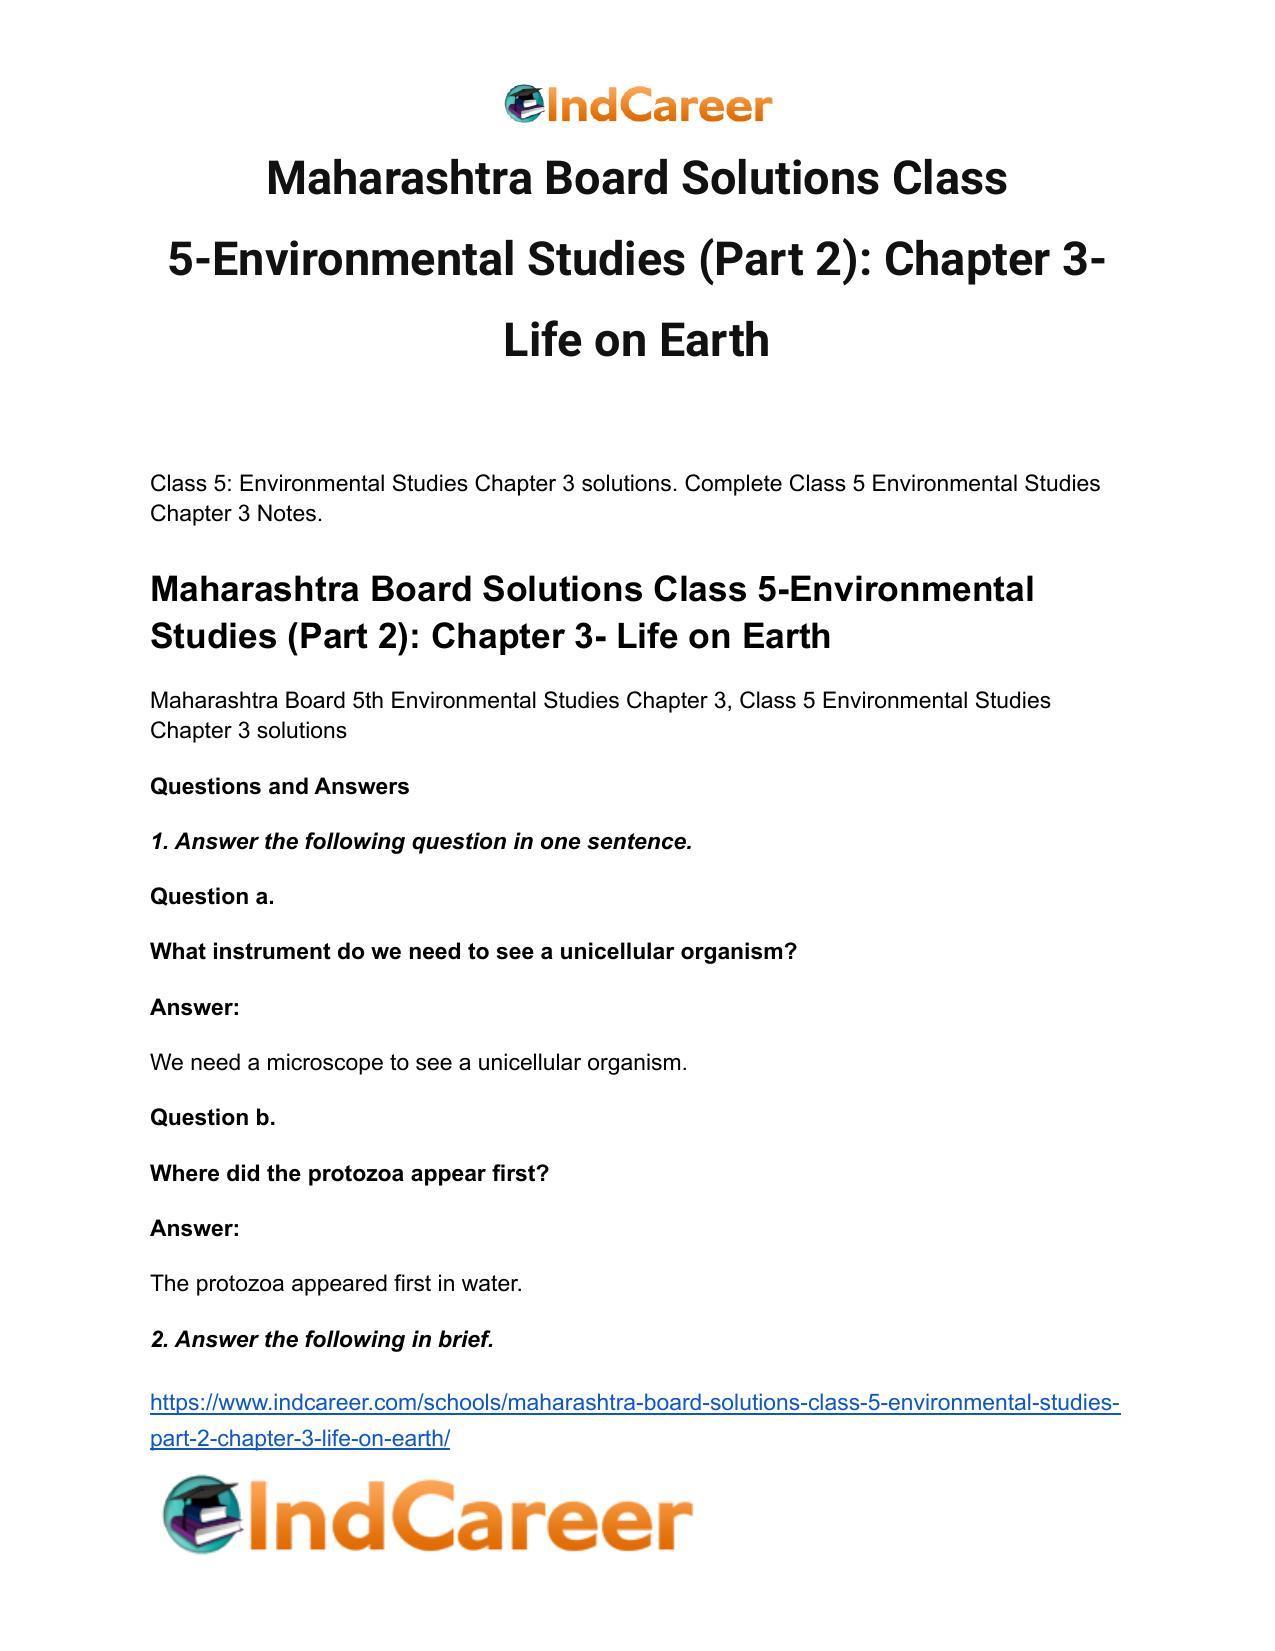 Maharashtra Board Solutions Class 5-Environmental Studies (Part 2): Chapter 3- Life on Earth - Page 2